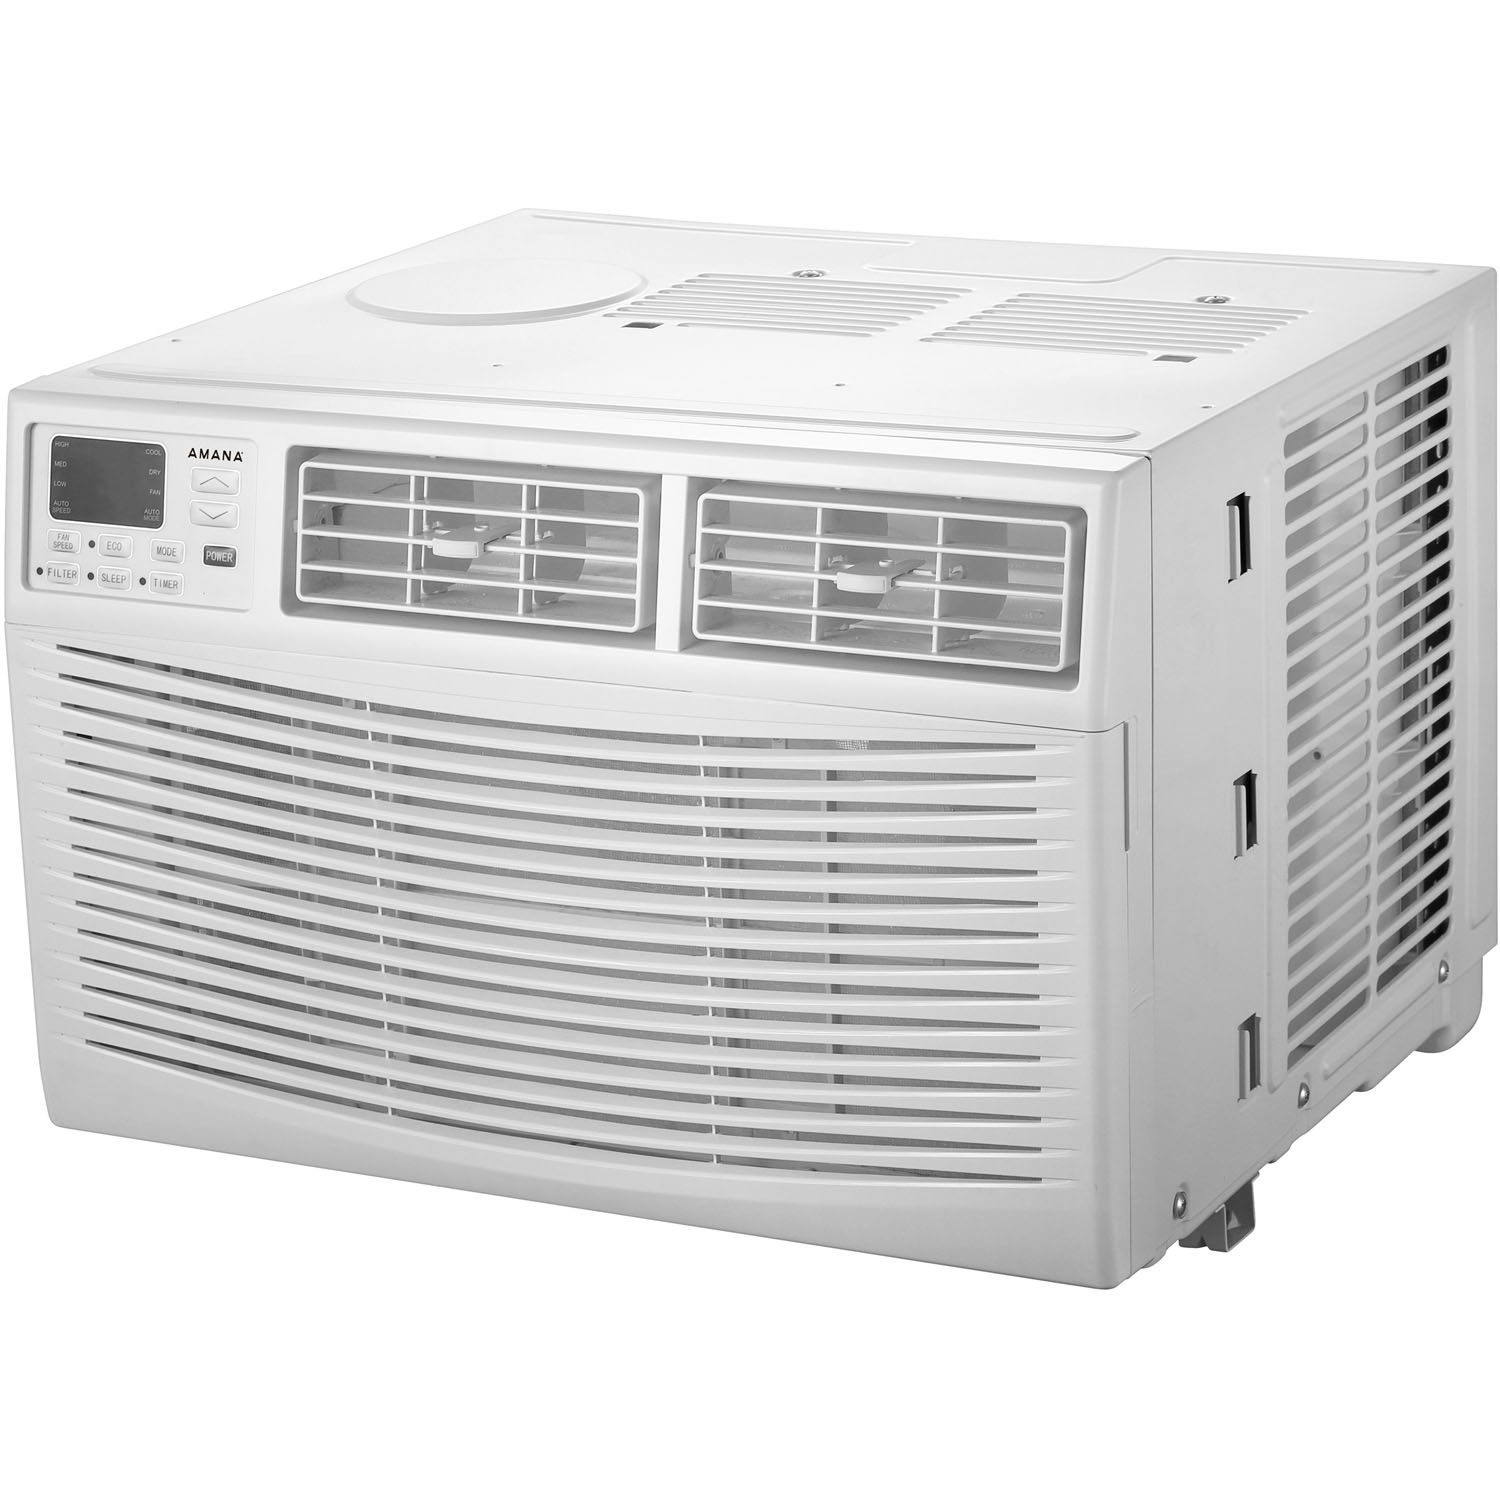 Amana AMAP101BW 10,000 BTU 115V Window-Mounted Air Conditioner with Remote Control - image 1 of 7